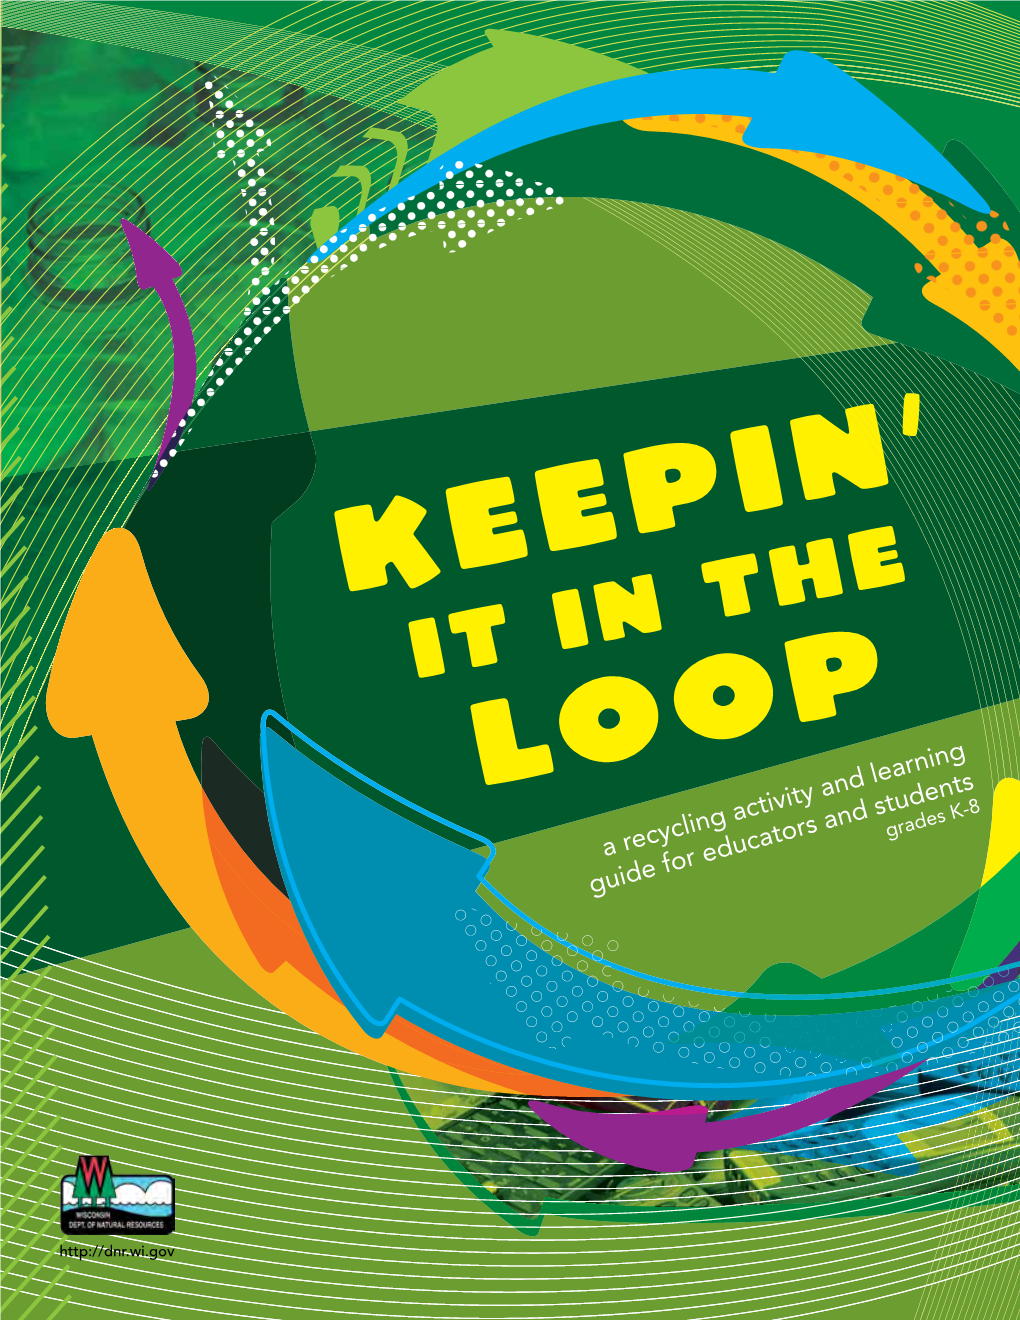 Keepin' It in the Loop: a Recycling Activity and Learning Guide For